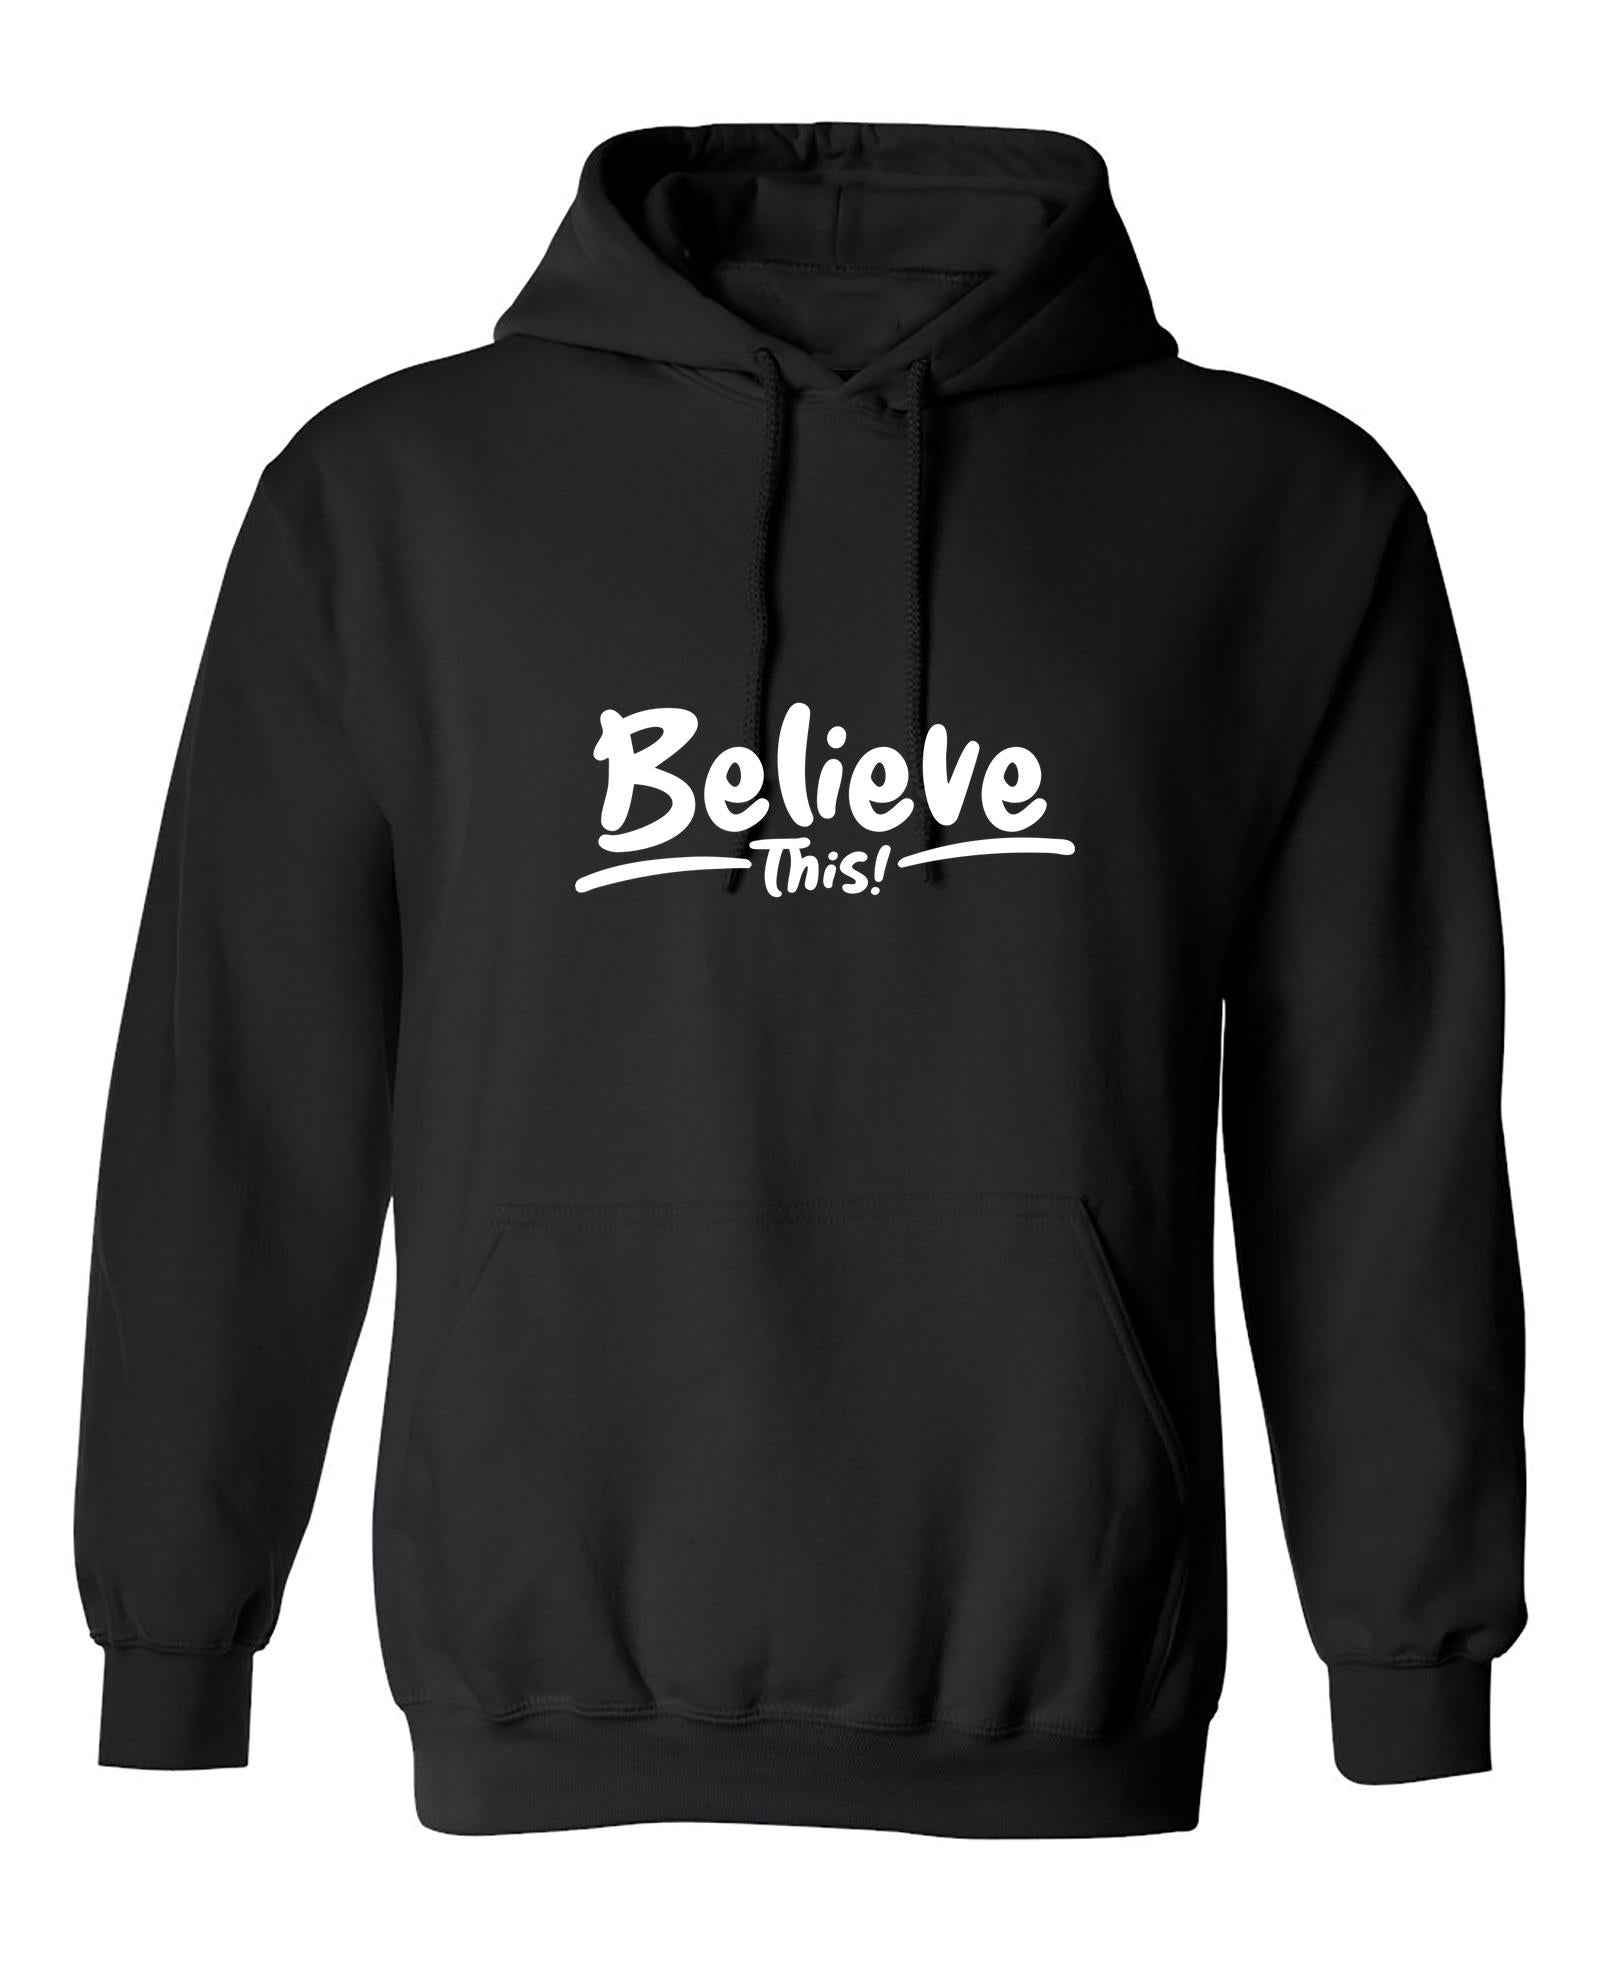 Funny T-Shirts design "Believe This!"